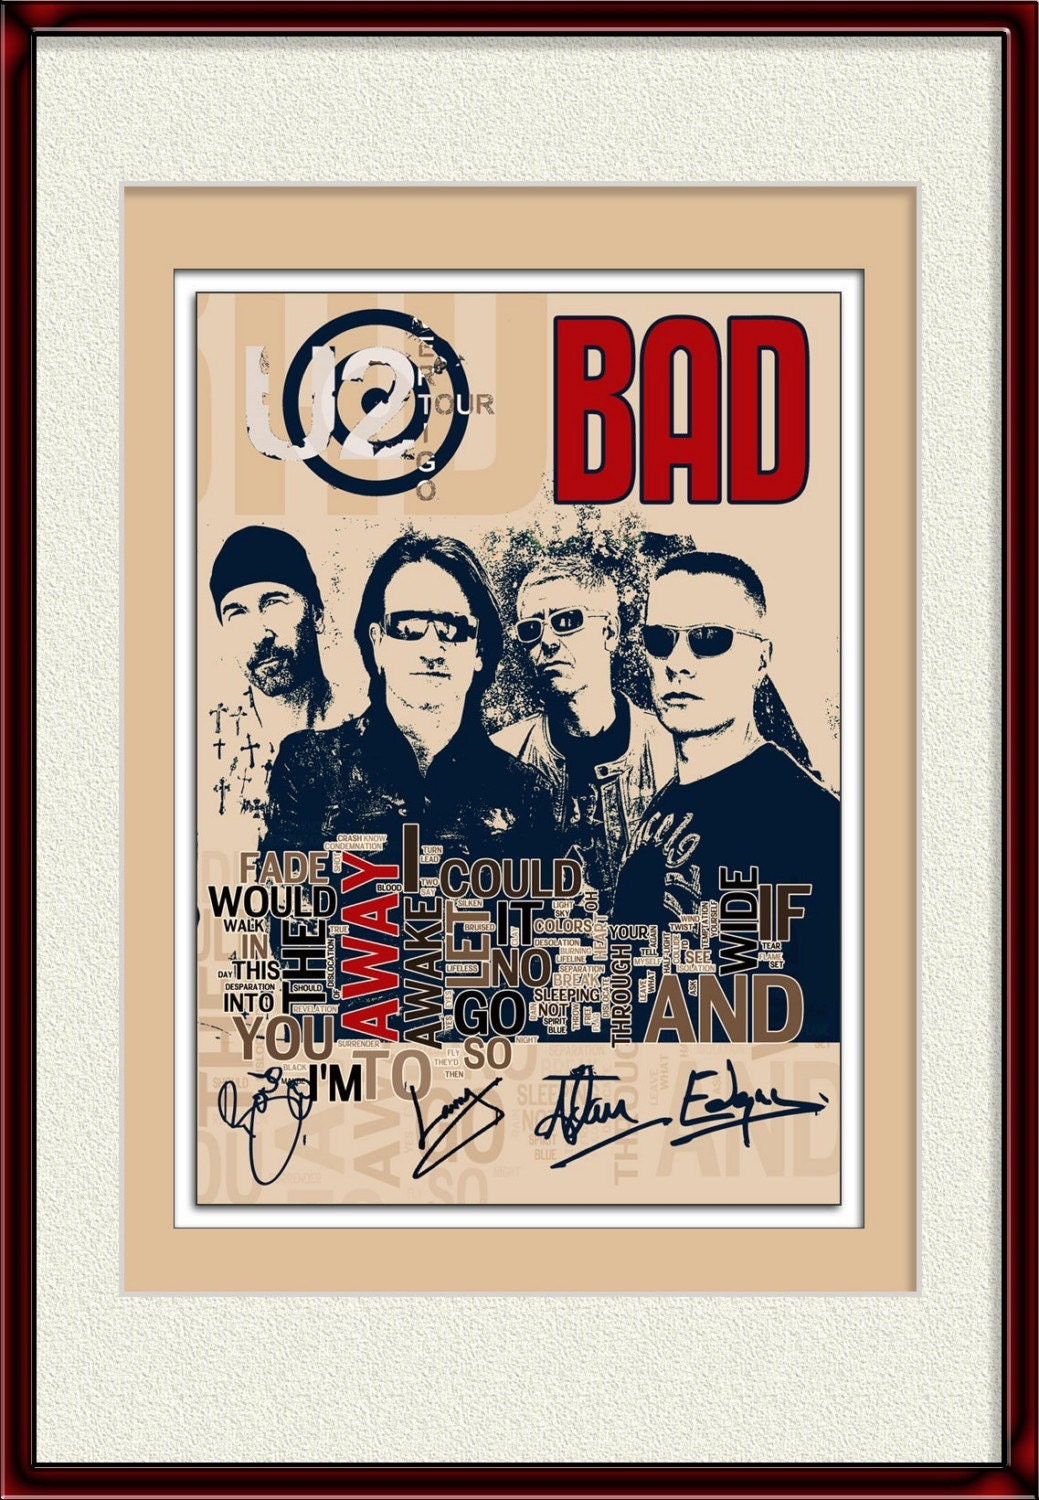 BAD - u2 the song - collage limited edition